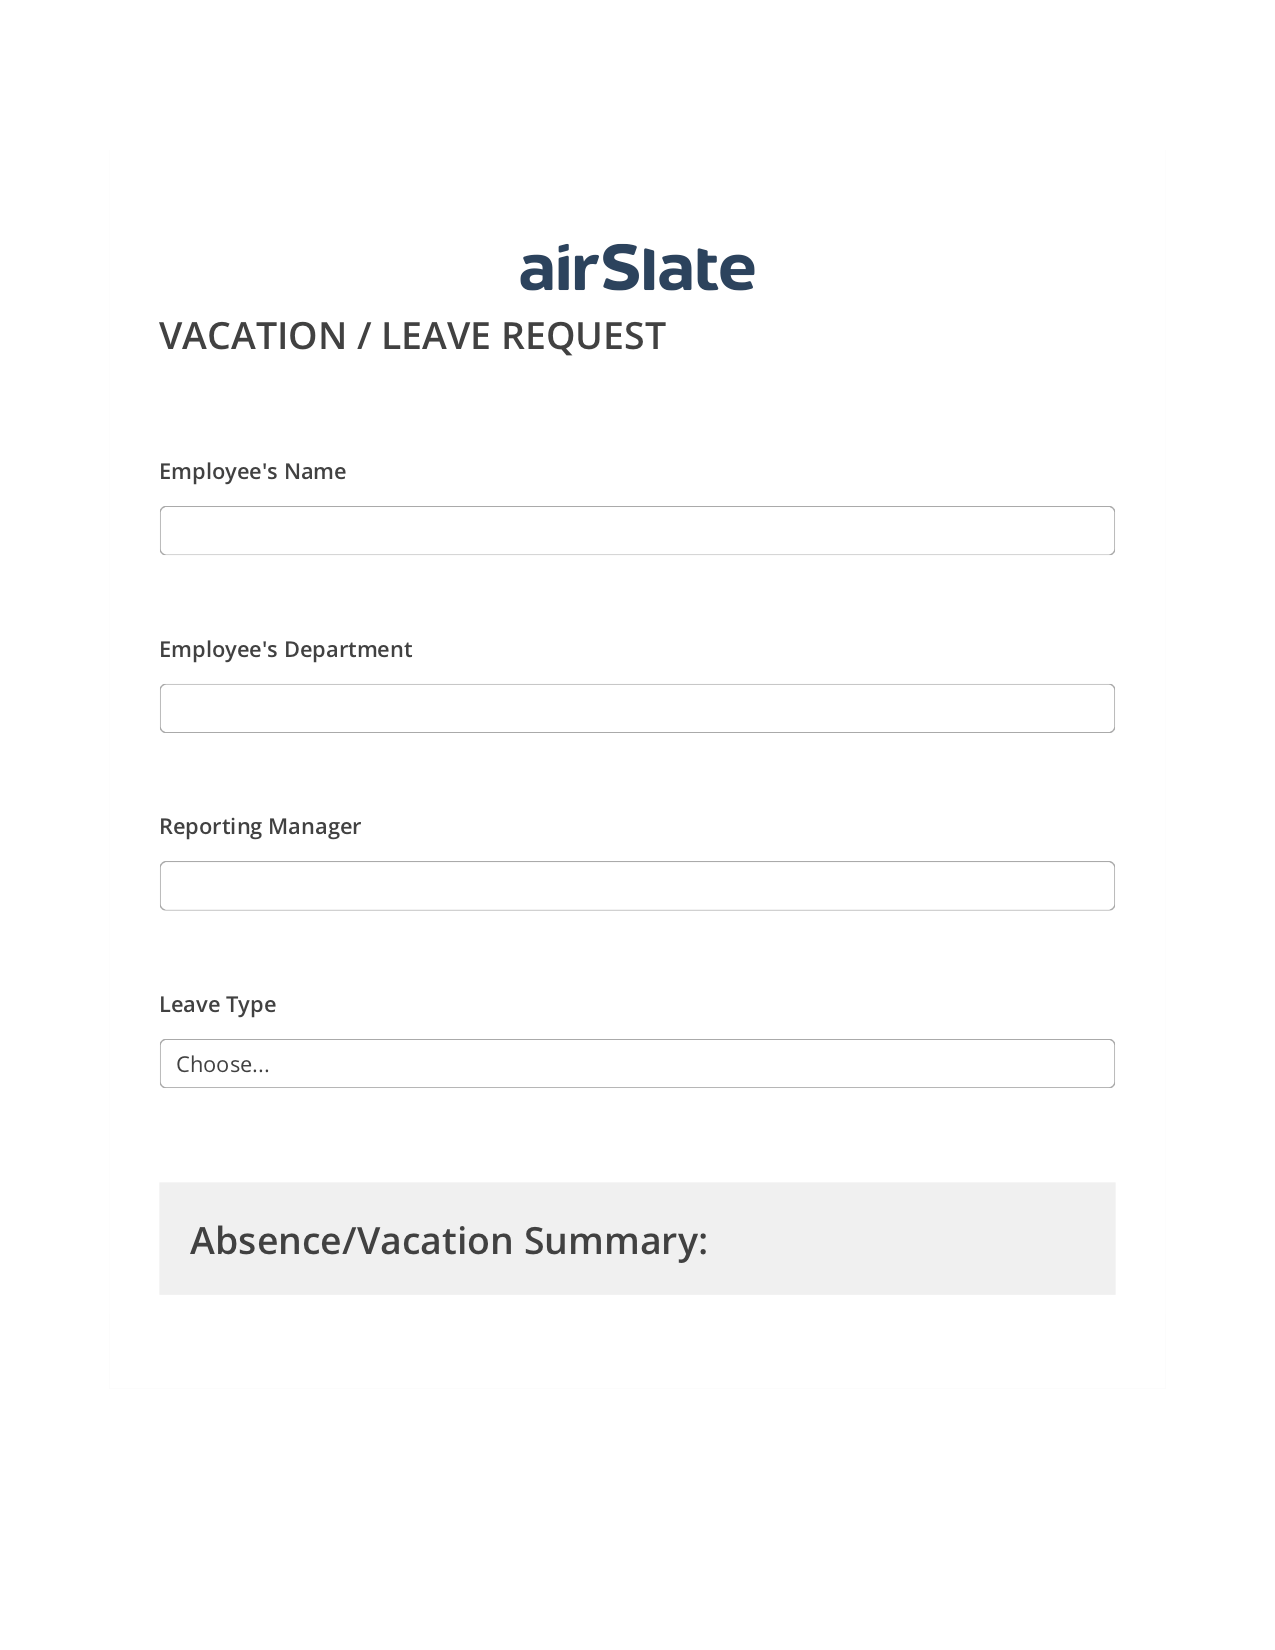 Vacation/Leave Request Workflow System Bot - Slack Two-Way Binding Bot, Google Sheet Two-Way Binding Bot, Post-finish Document Bot